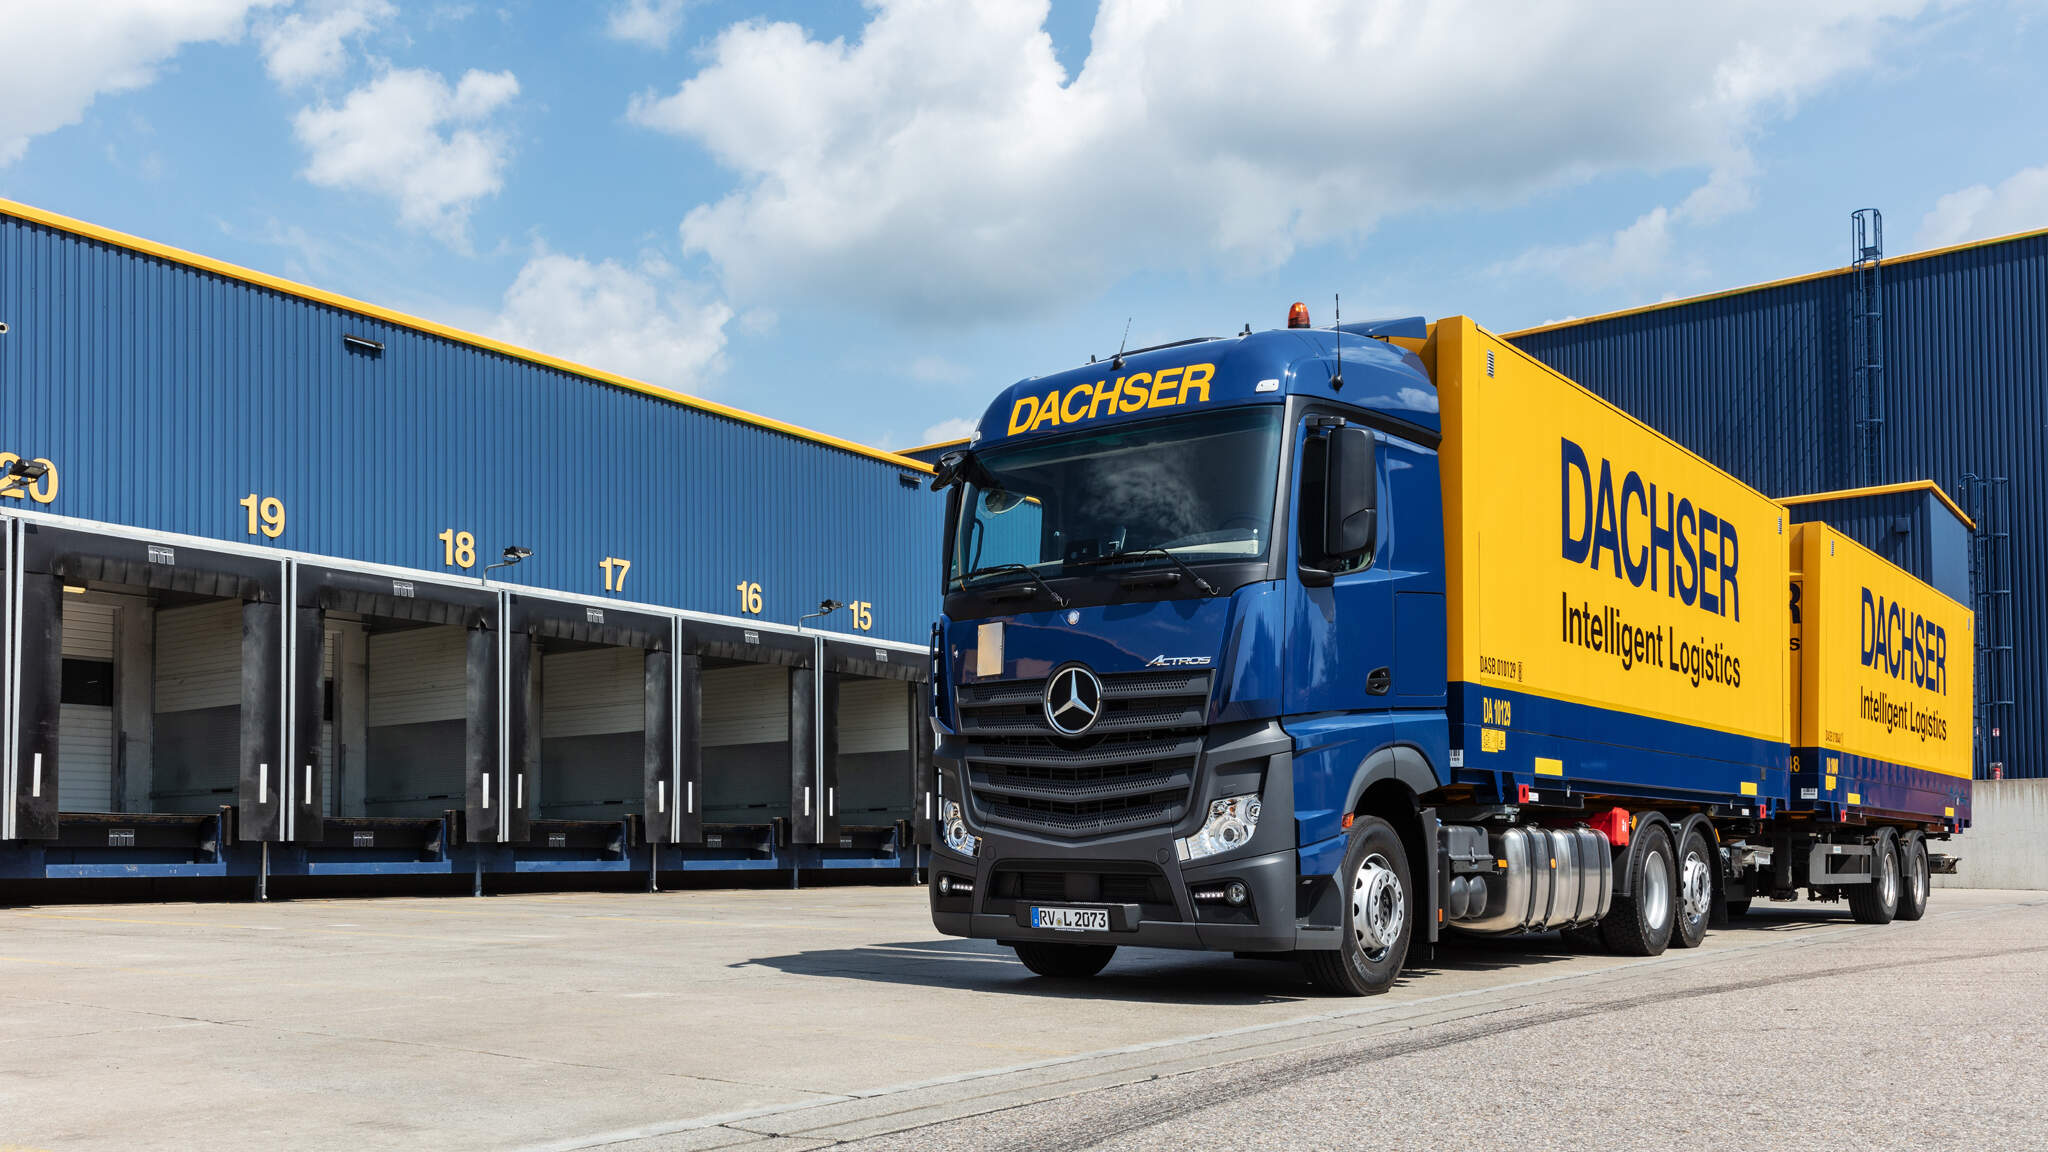 DACHSER pursues sustainable growth